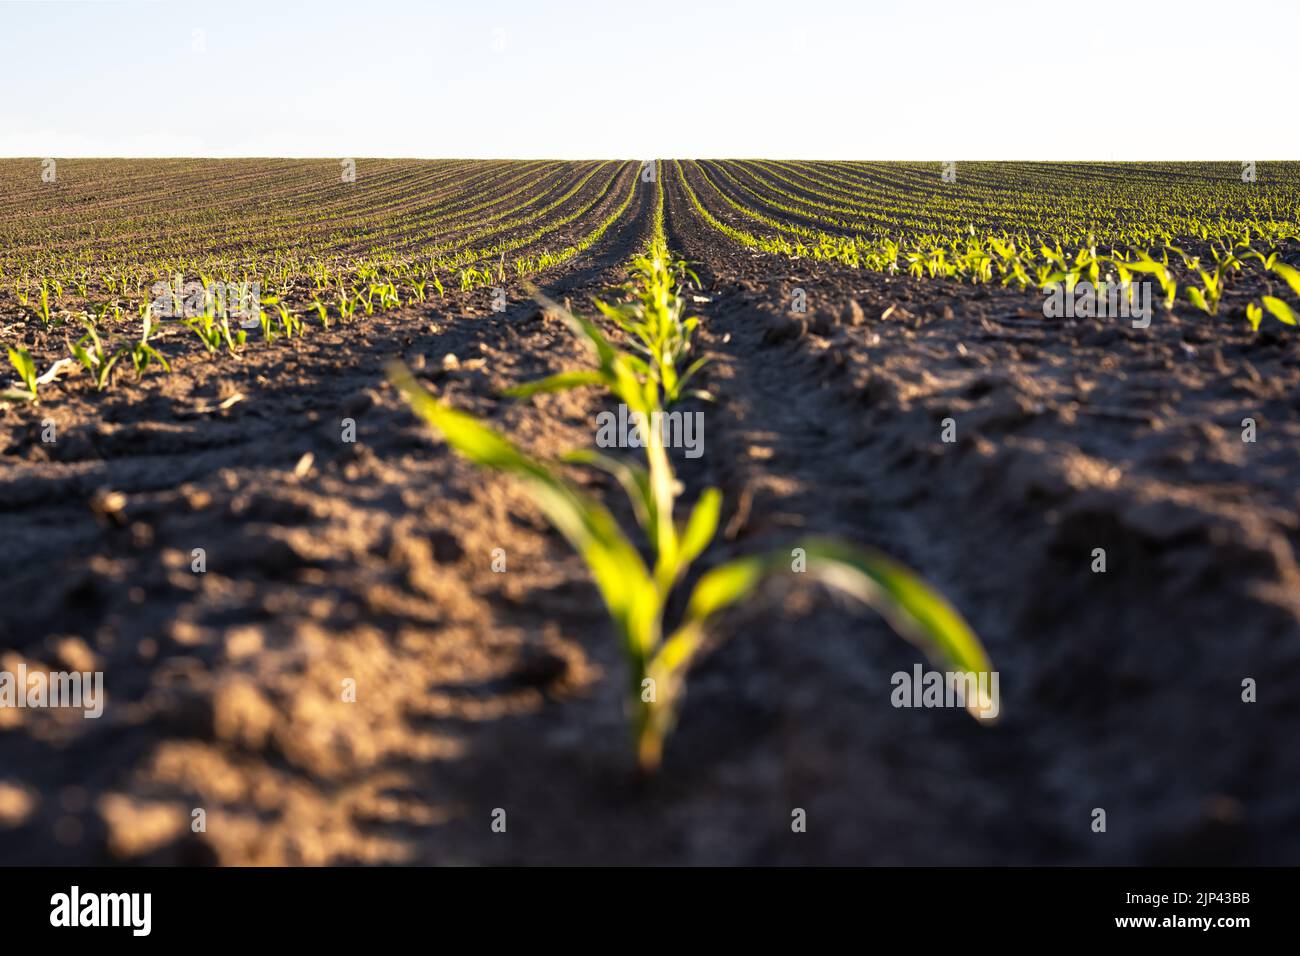 Green corn rows of the agricultural fields of Ukraine. Blue sky on background. Rural agicultural landscape Stock Photo